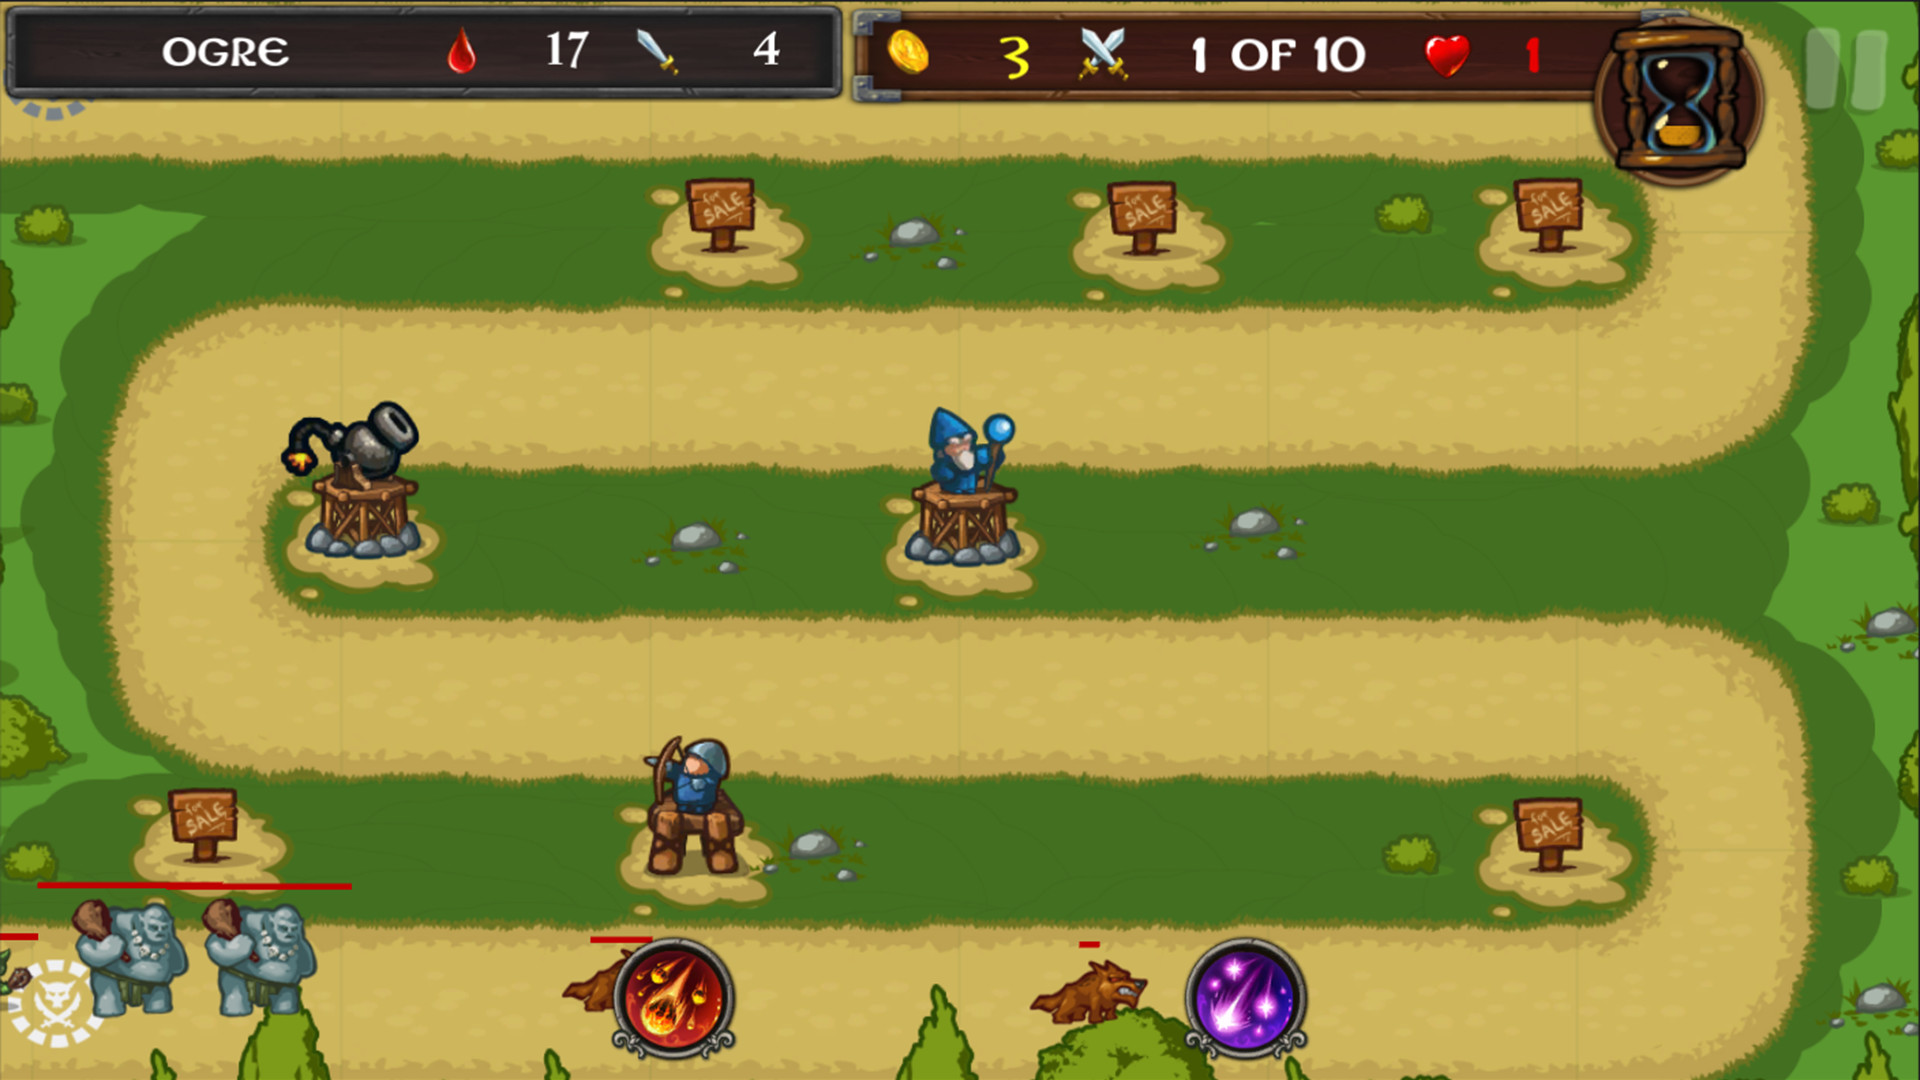 Tower Defense 2D: Play Tower Defense 2D for free